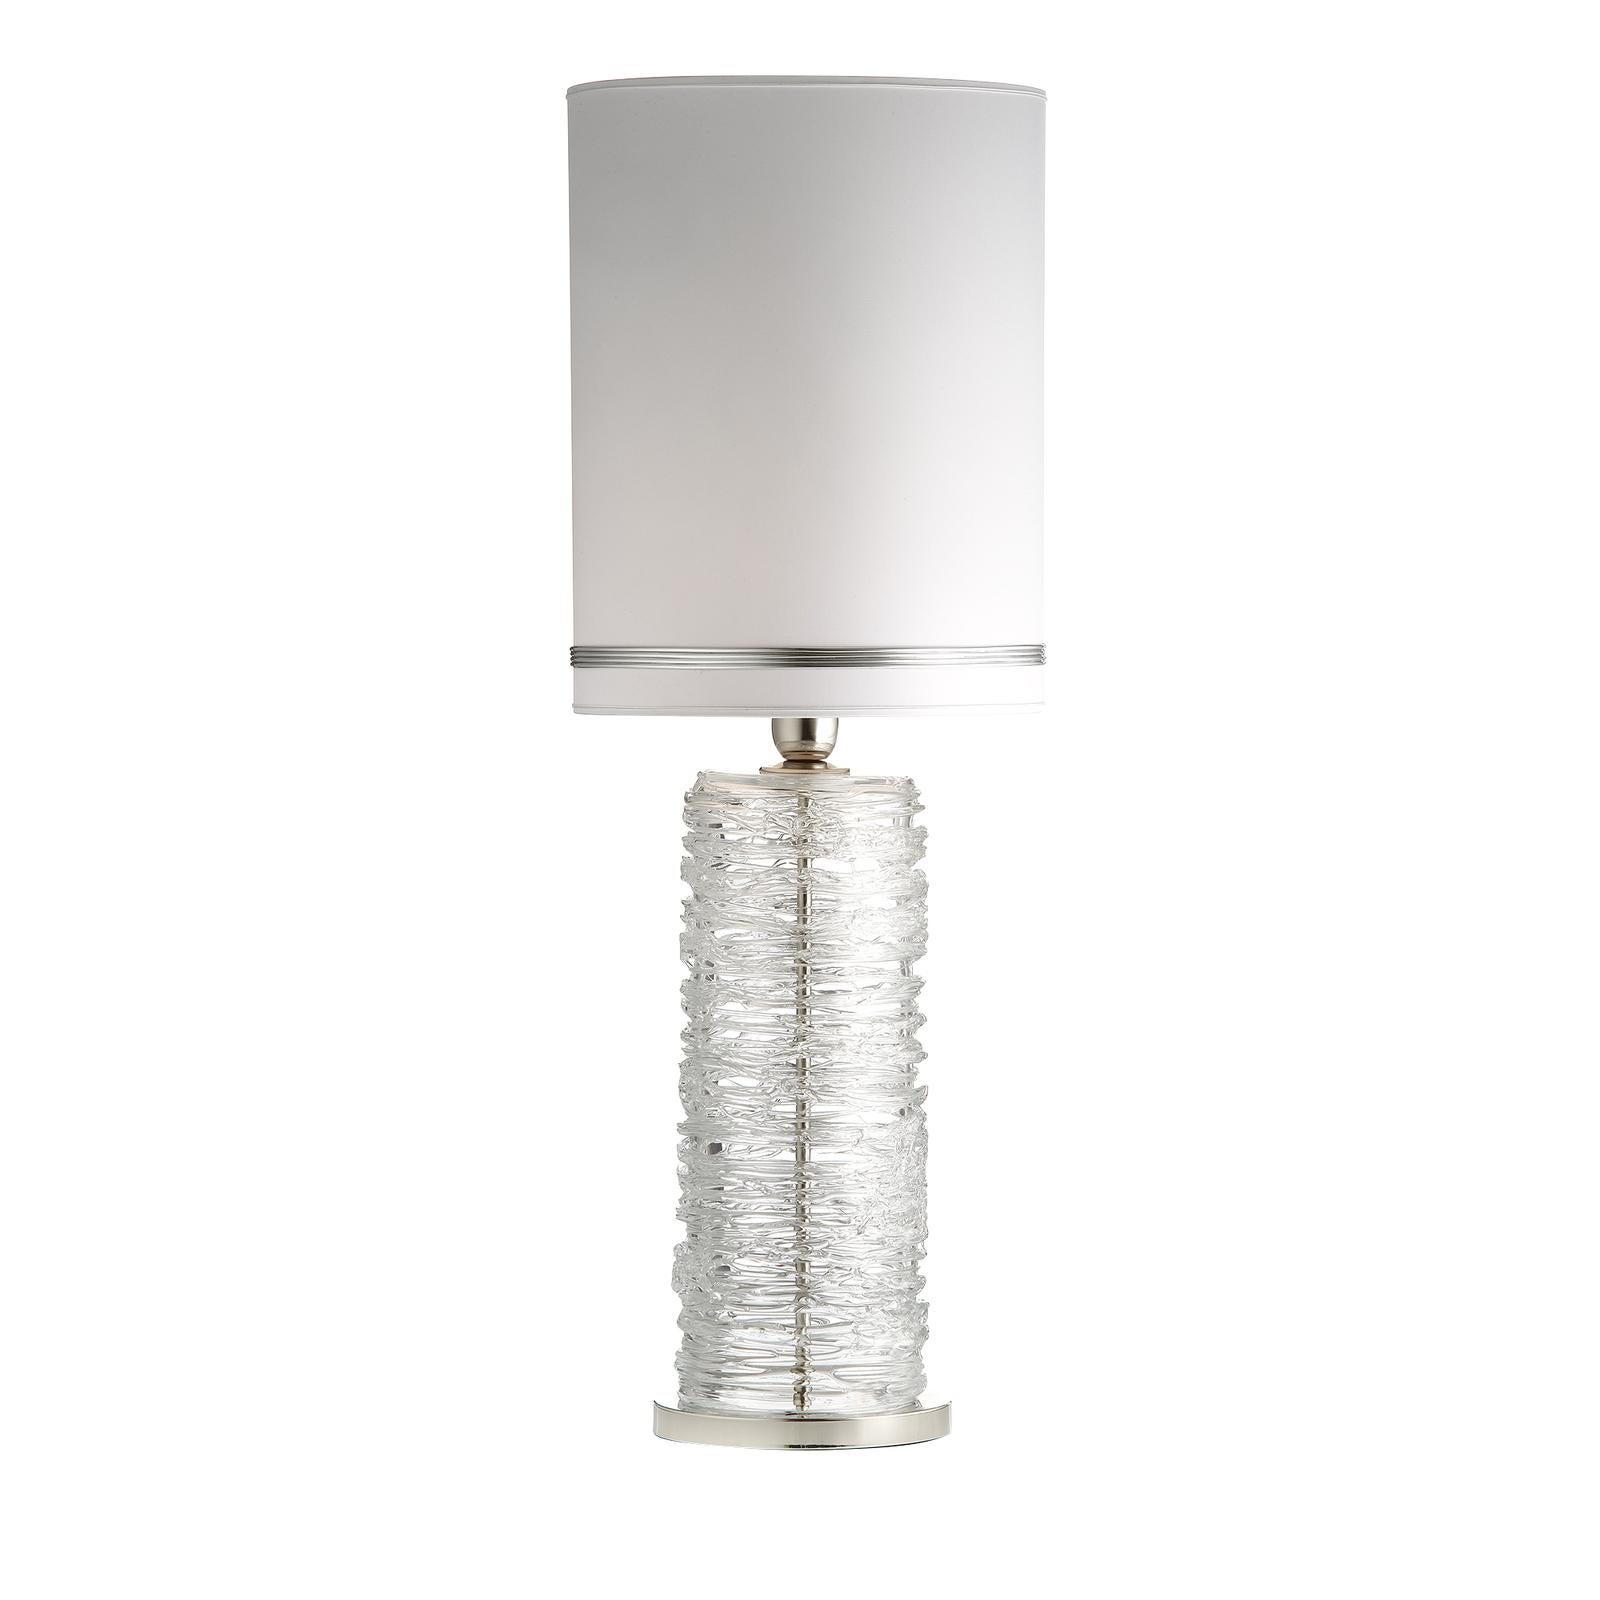 An object of strong visual impact, thanks to its striking surface and exquisite craftsmanship, this table lamp will be a stunning addition to a modern decor, where it will not go unnoticed either in an entryway as a desk lamp, or in a living room as